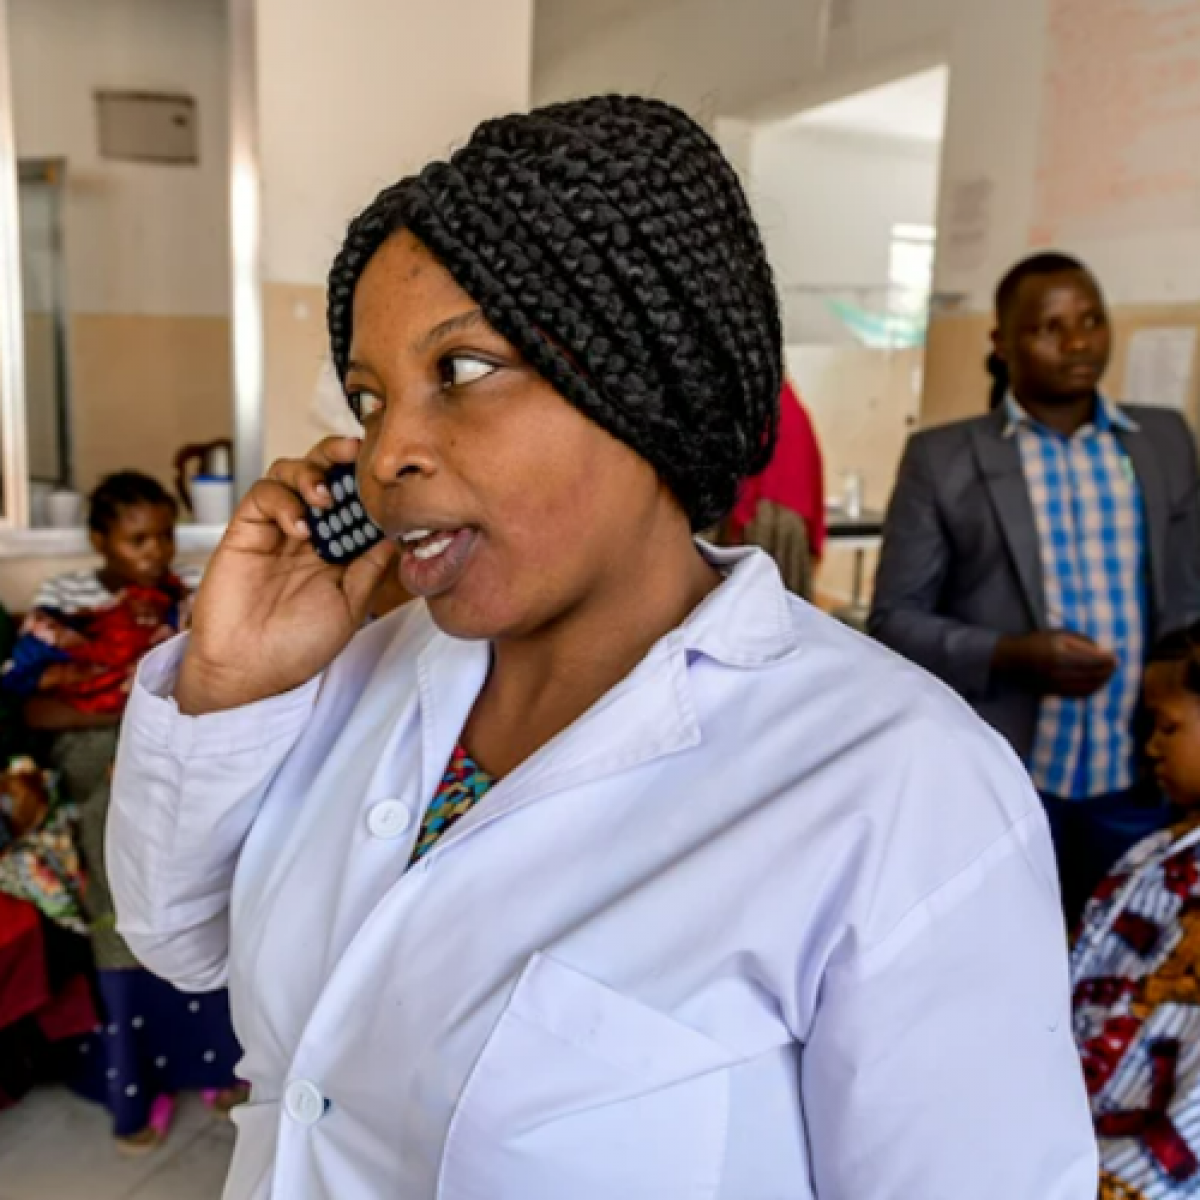 Health workers in northern Tanzania using a new phone call referral system, developed by USAID in partnership with the Government of Tanzania, to fast-track decision-making and prevent needless deaths of mothers and newborns during childbirth. 